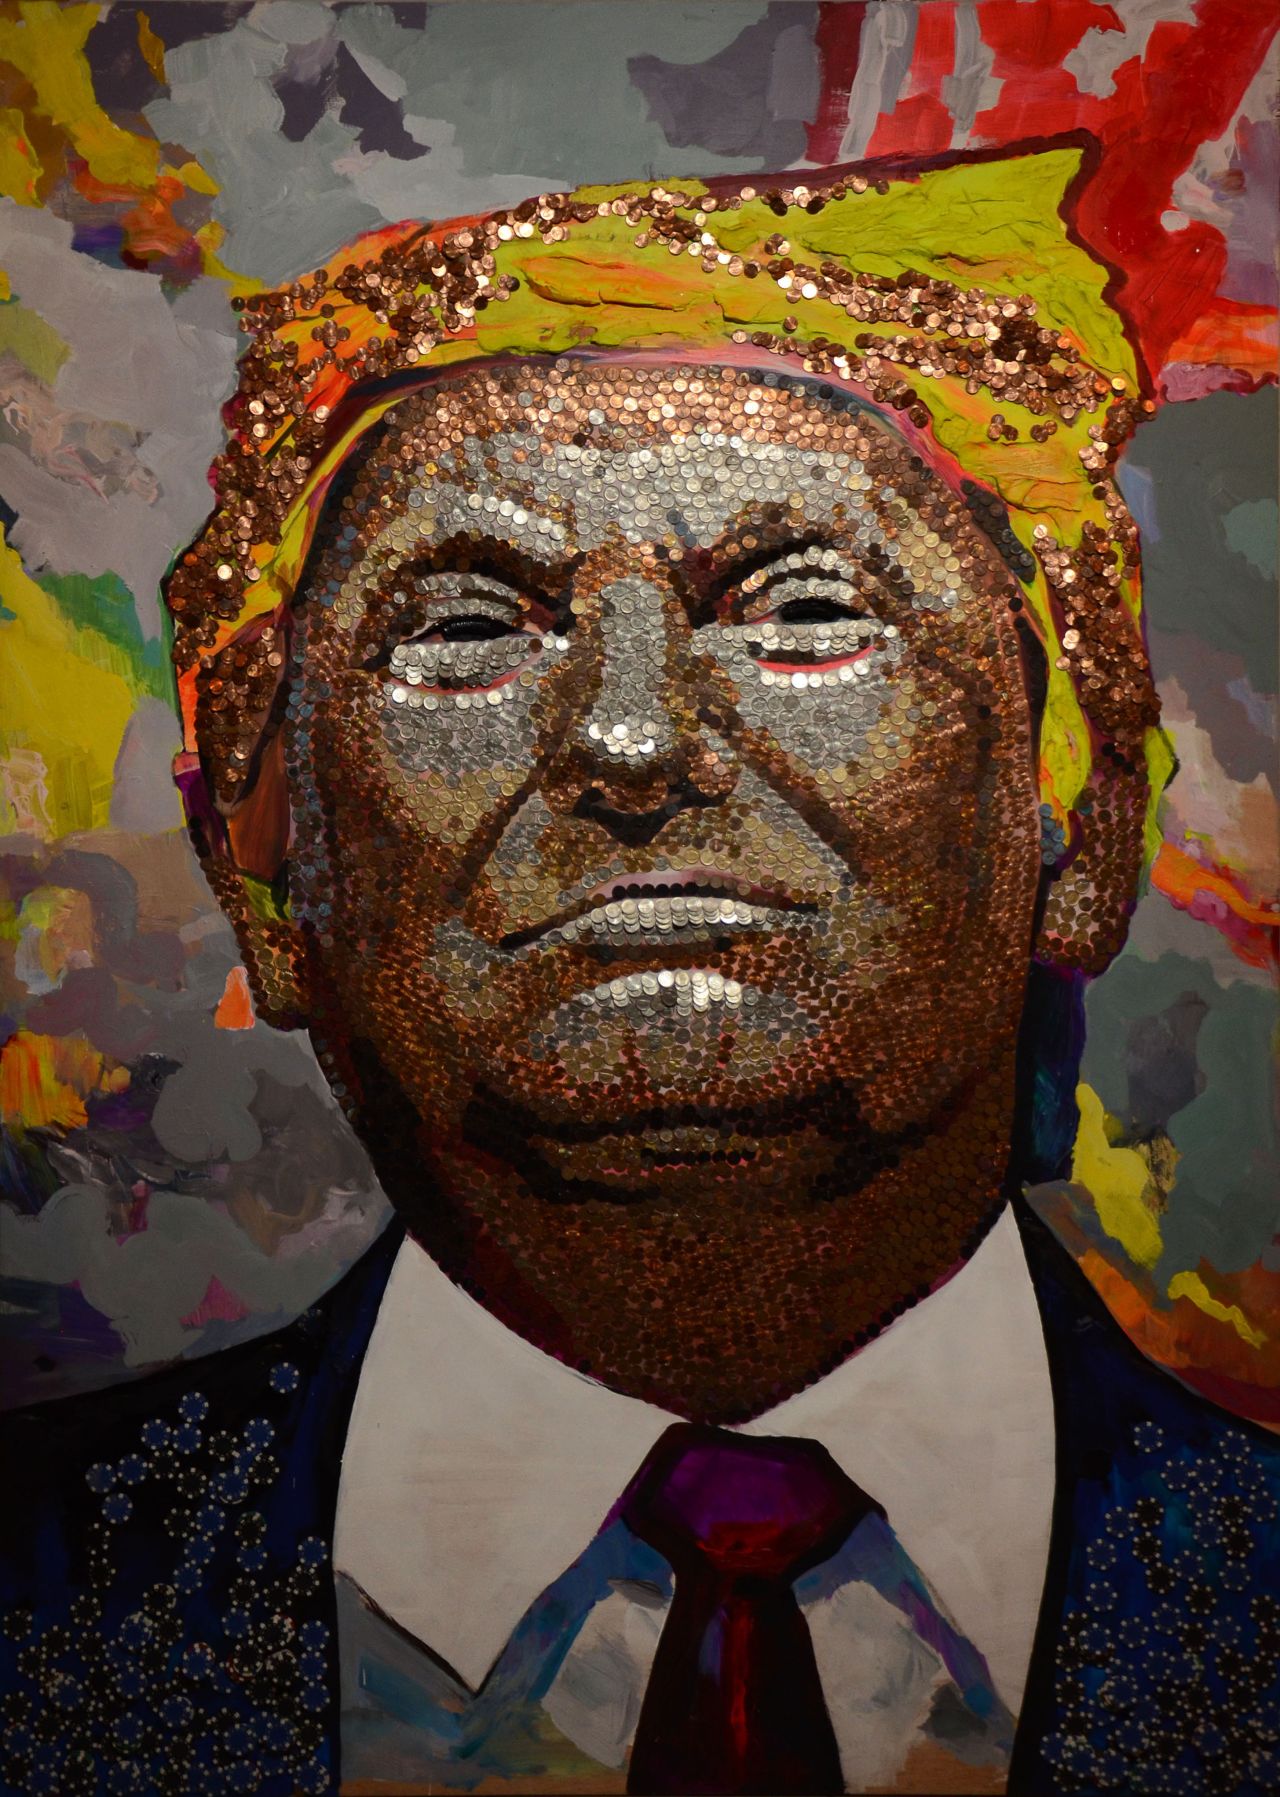 A giant portrait of Trump made from hundreds of pennies